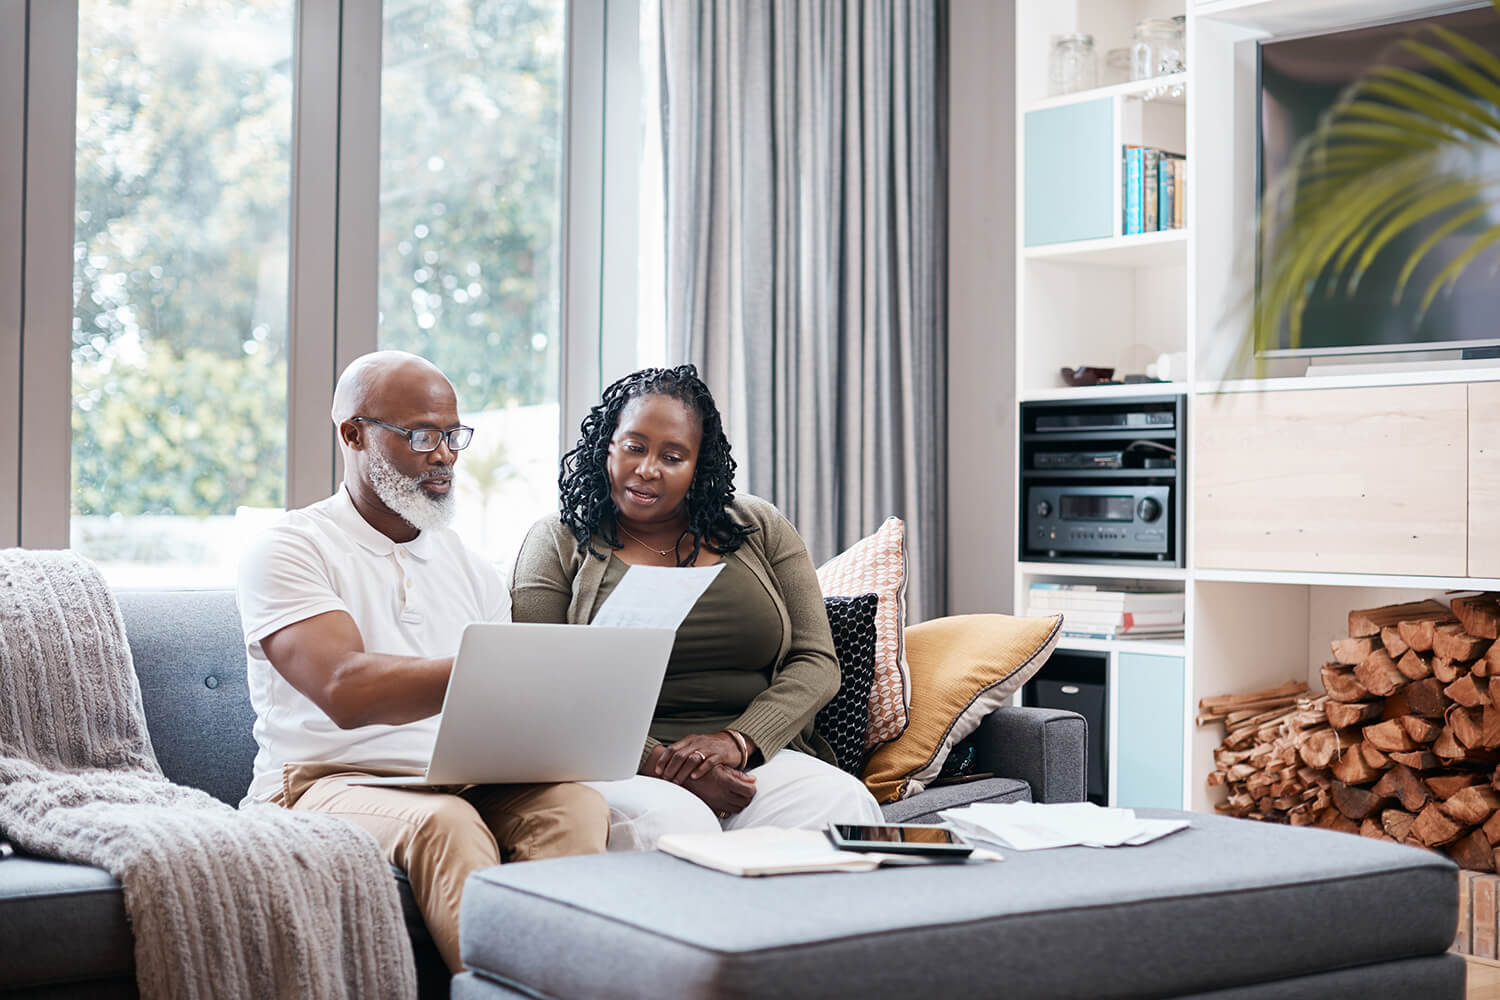 Sitting on a couch in their living room, a man and woman look over papers and a laptop. The Adult Function Report is a key form in the process of applying for disability benefits.